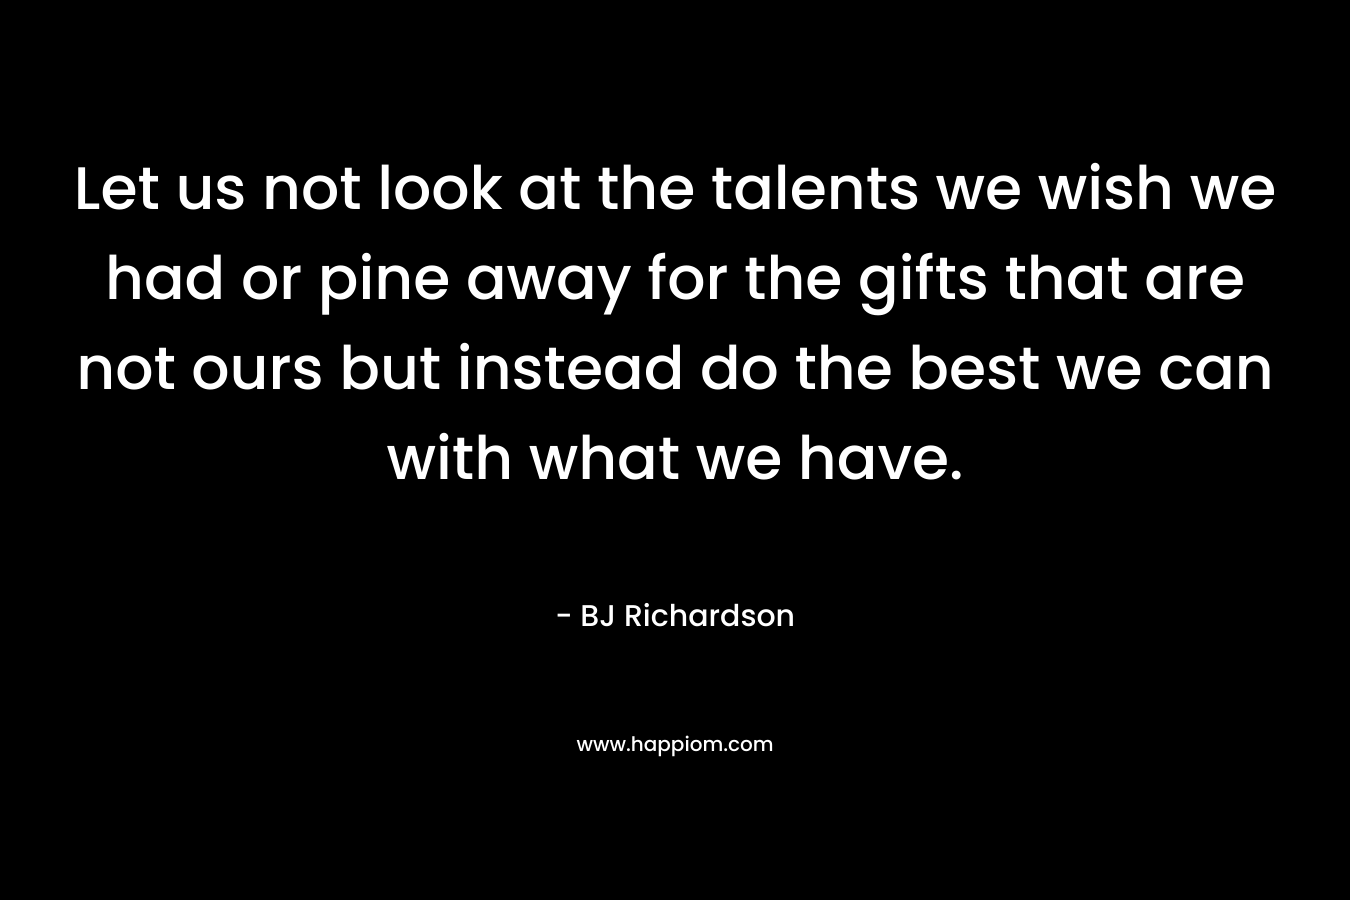 Let us not look at the talents we wish we had or pine away for the gifts that are not ours but instead do the best we can with what we have. – BJ  Richardson